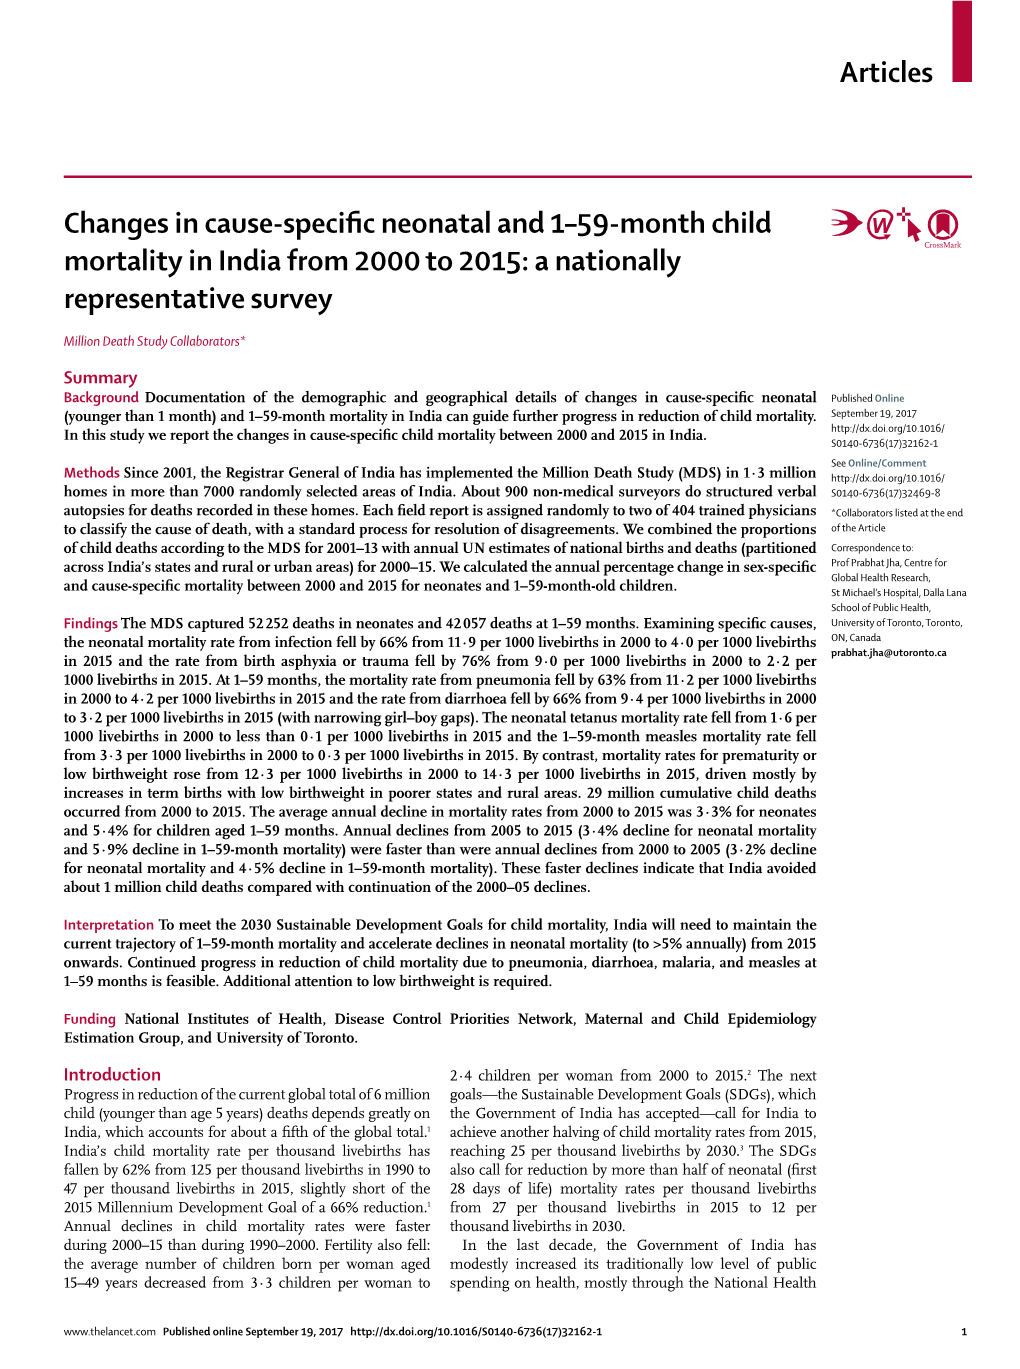 Changes in Cause-Specific Neonatal and 1–59-Month Child Mortality in India from 2000 to 2015: a Nationally Representative Survey